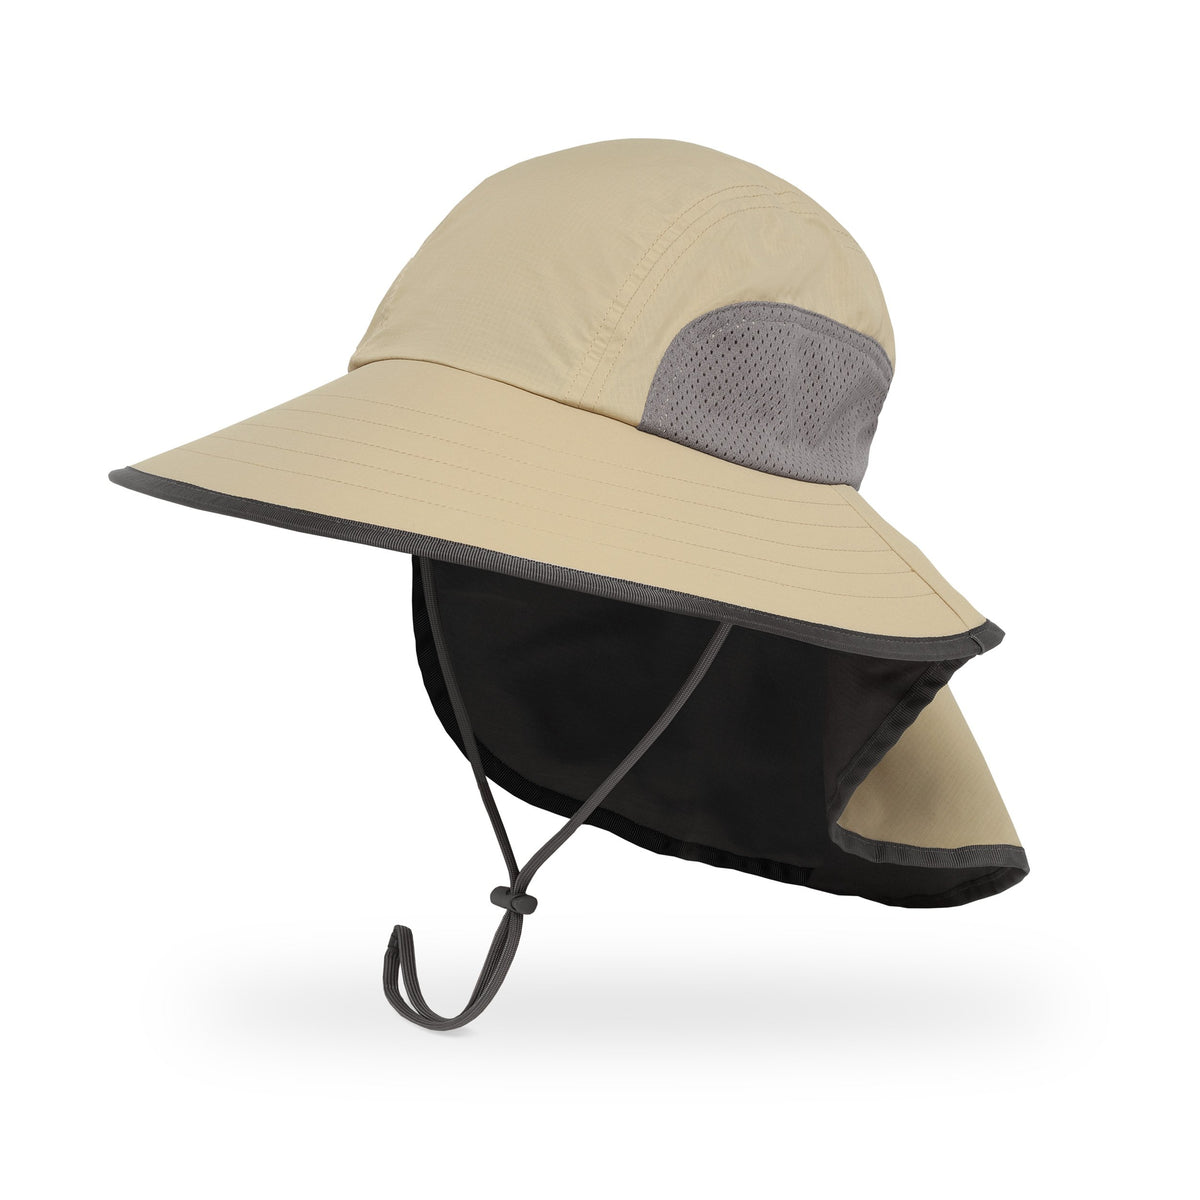 Unisex Khaki Boonie Hat With Wide Brim For Fishing, Garden, And